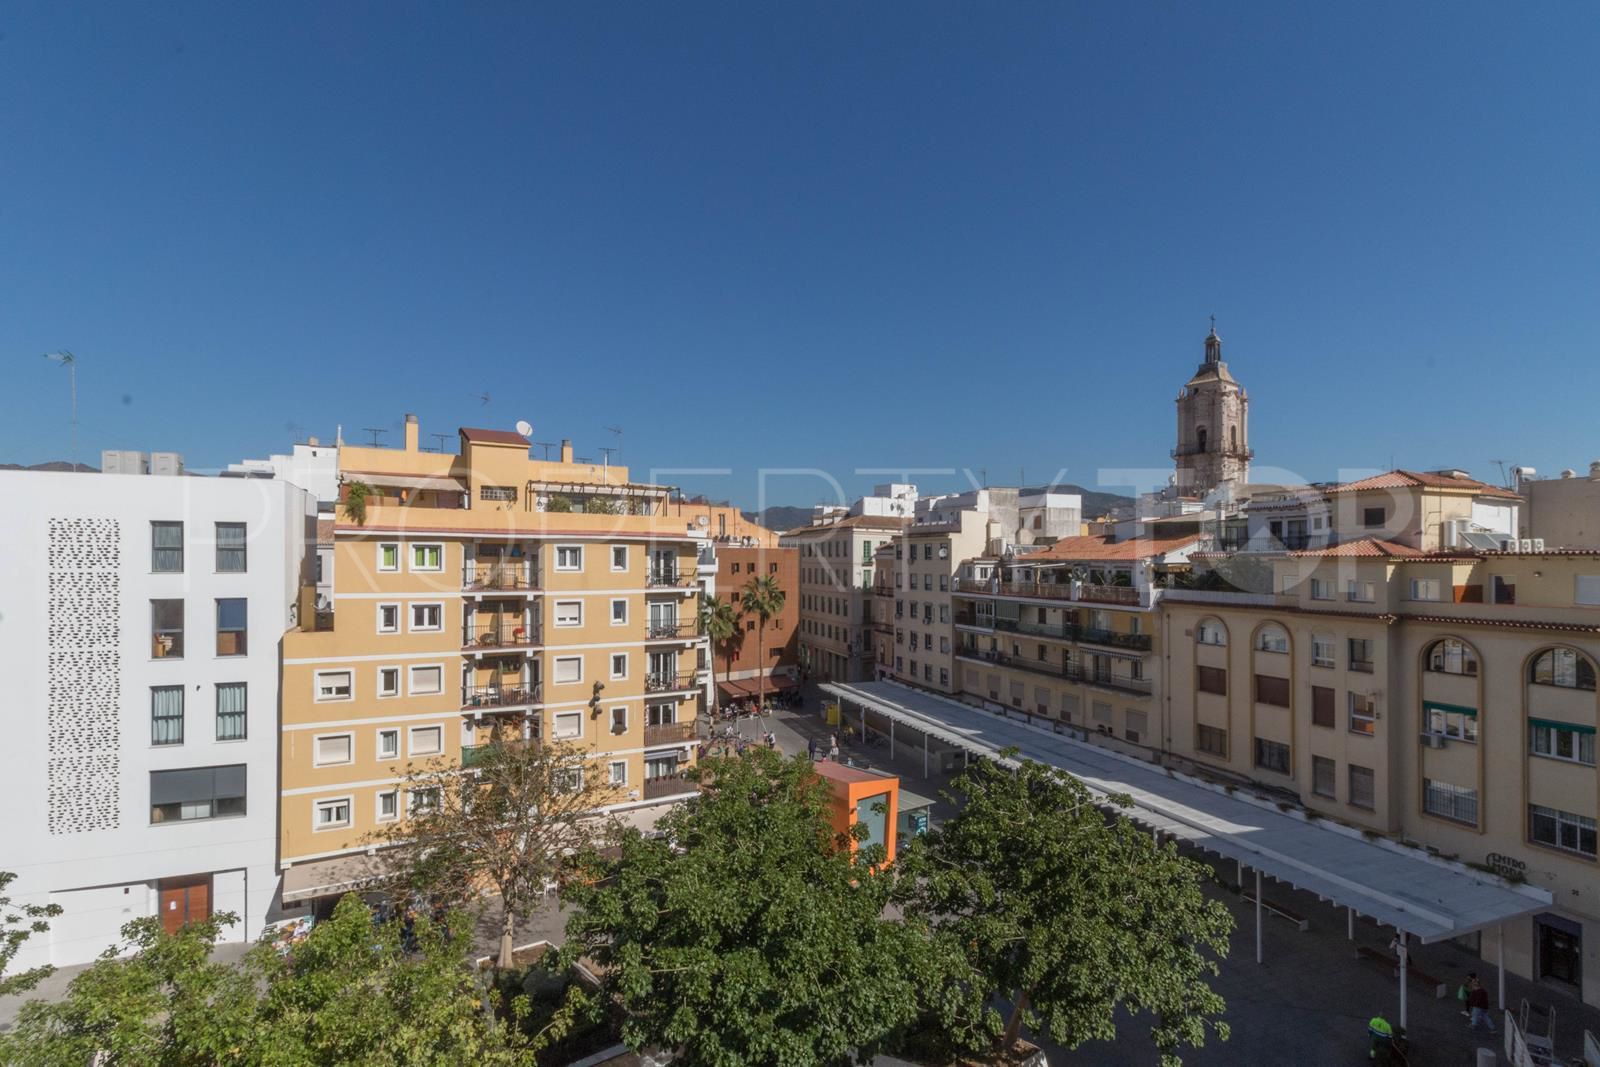 For sale penthouse with 1 bedroom in Malaga